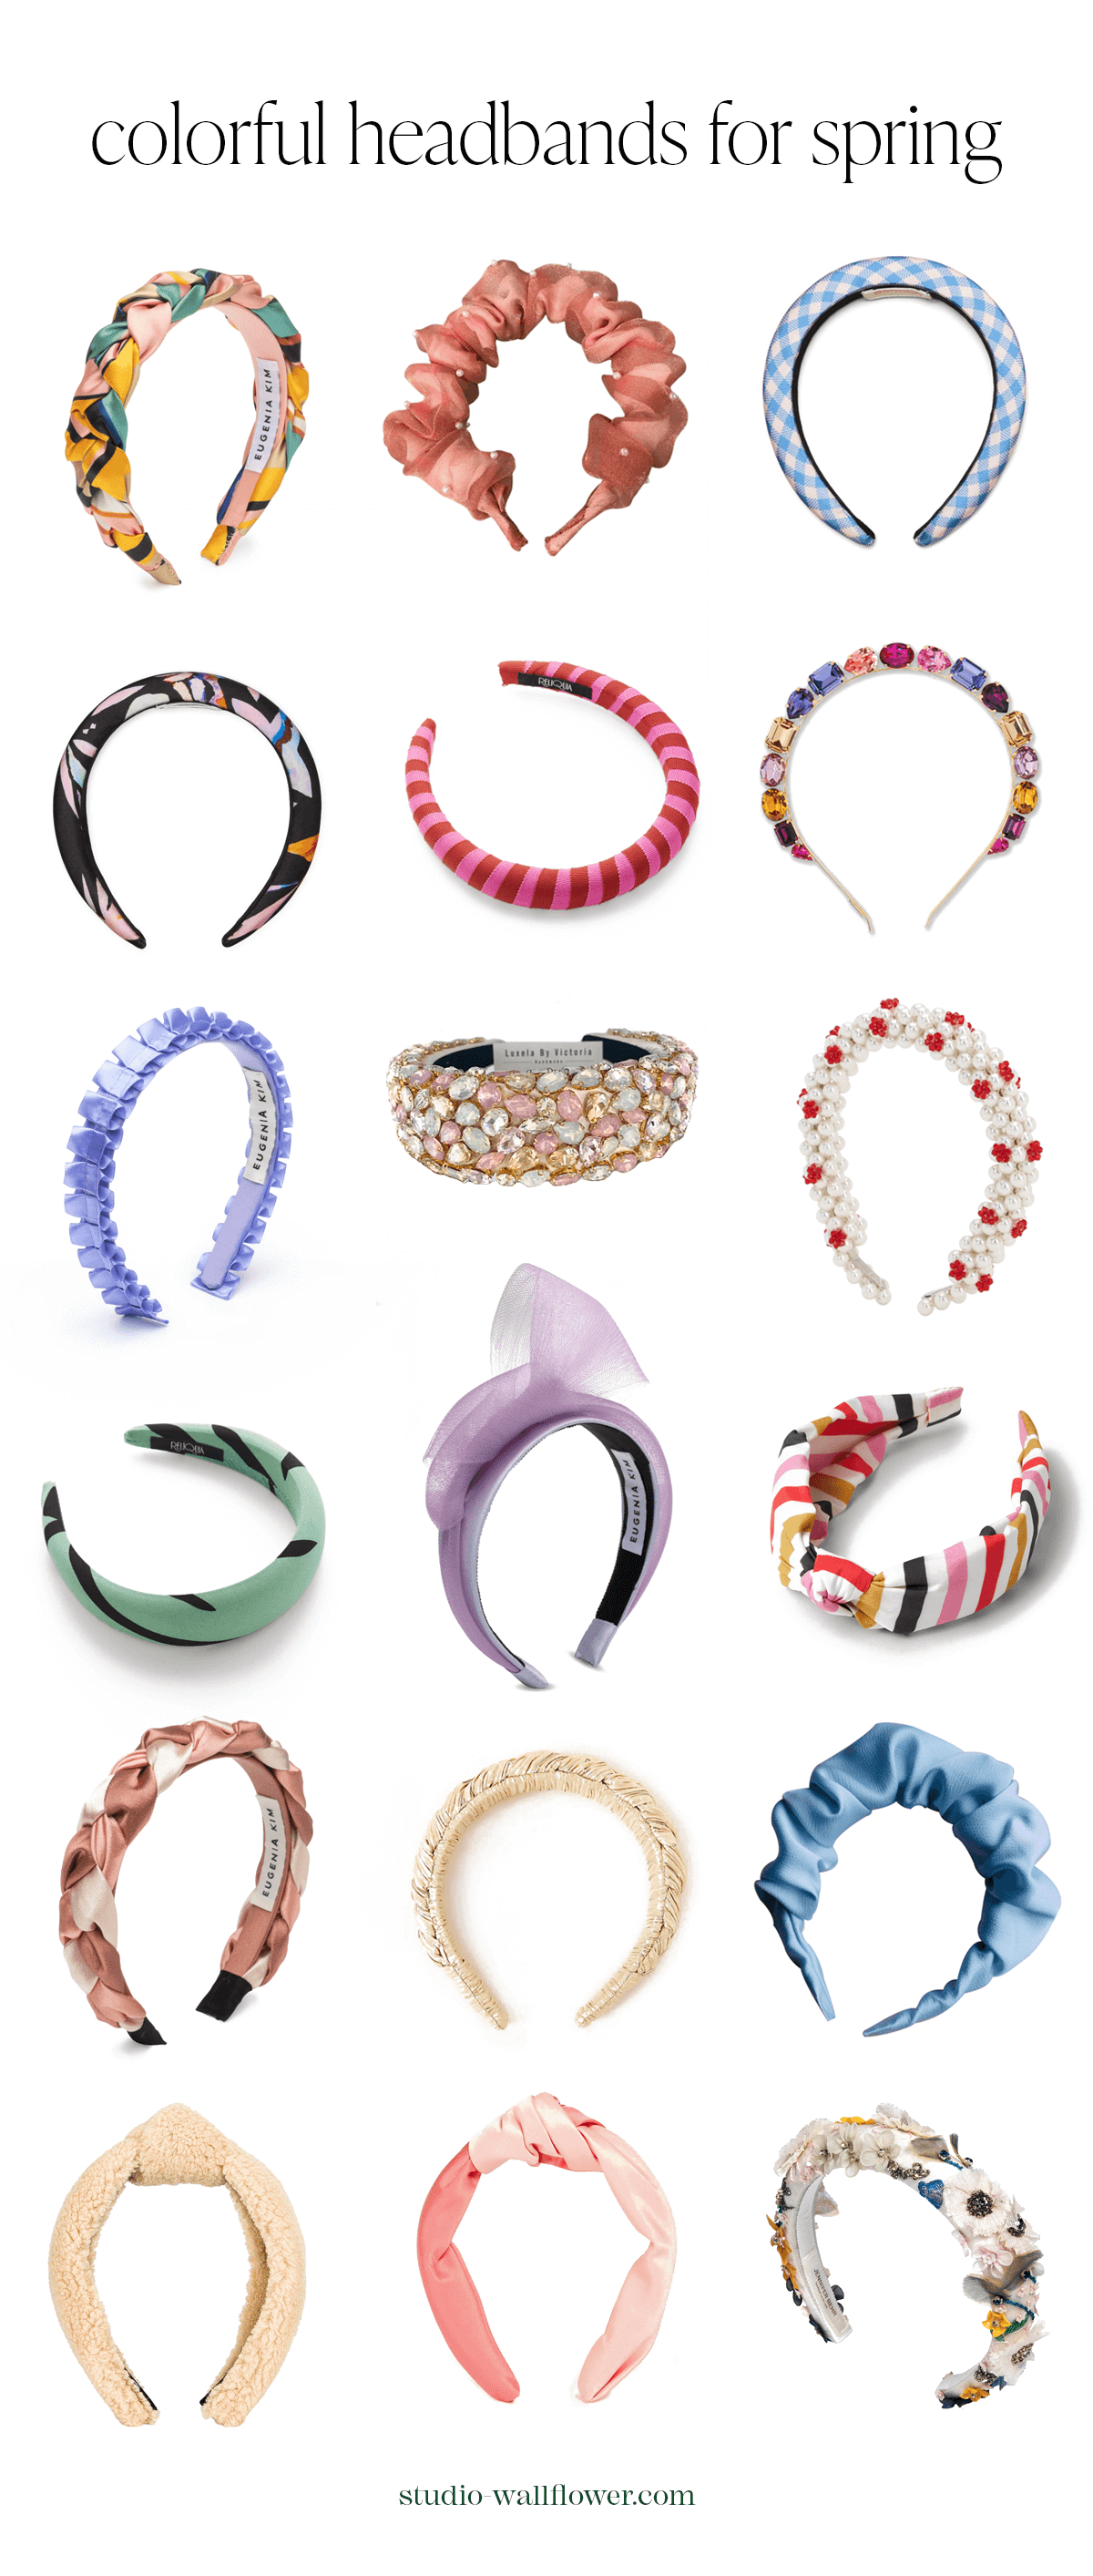 colorful headbands for spring